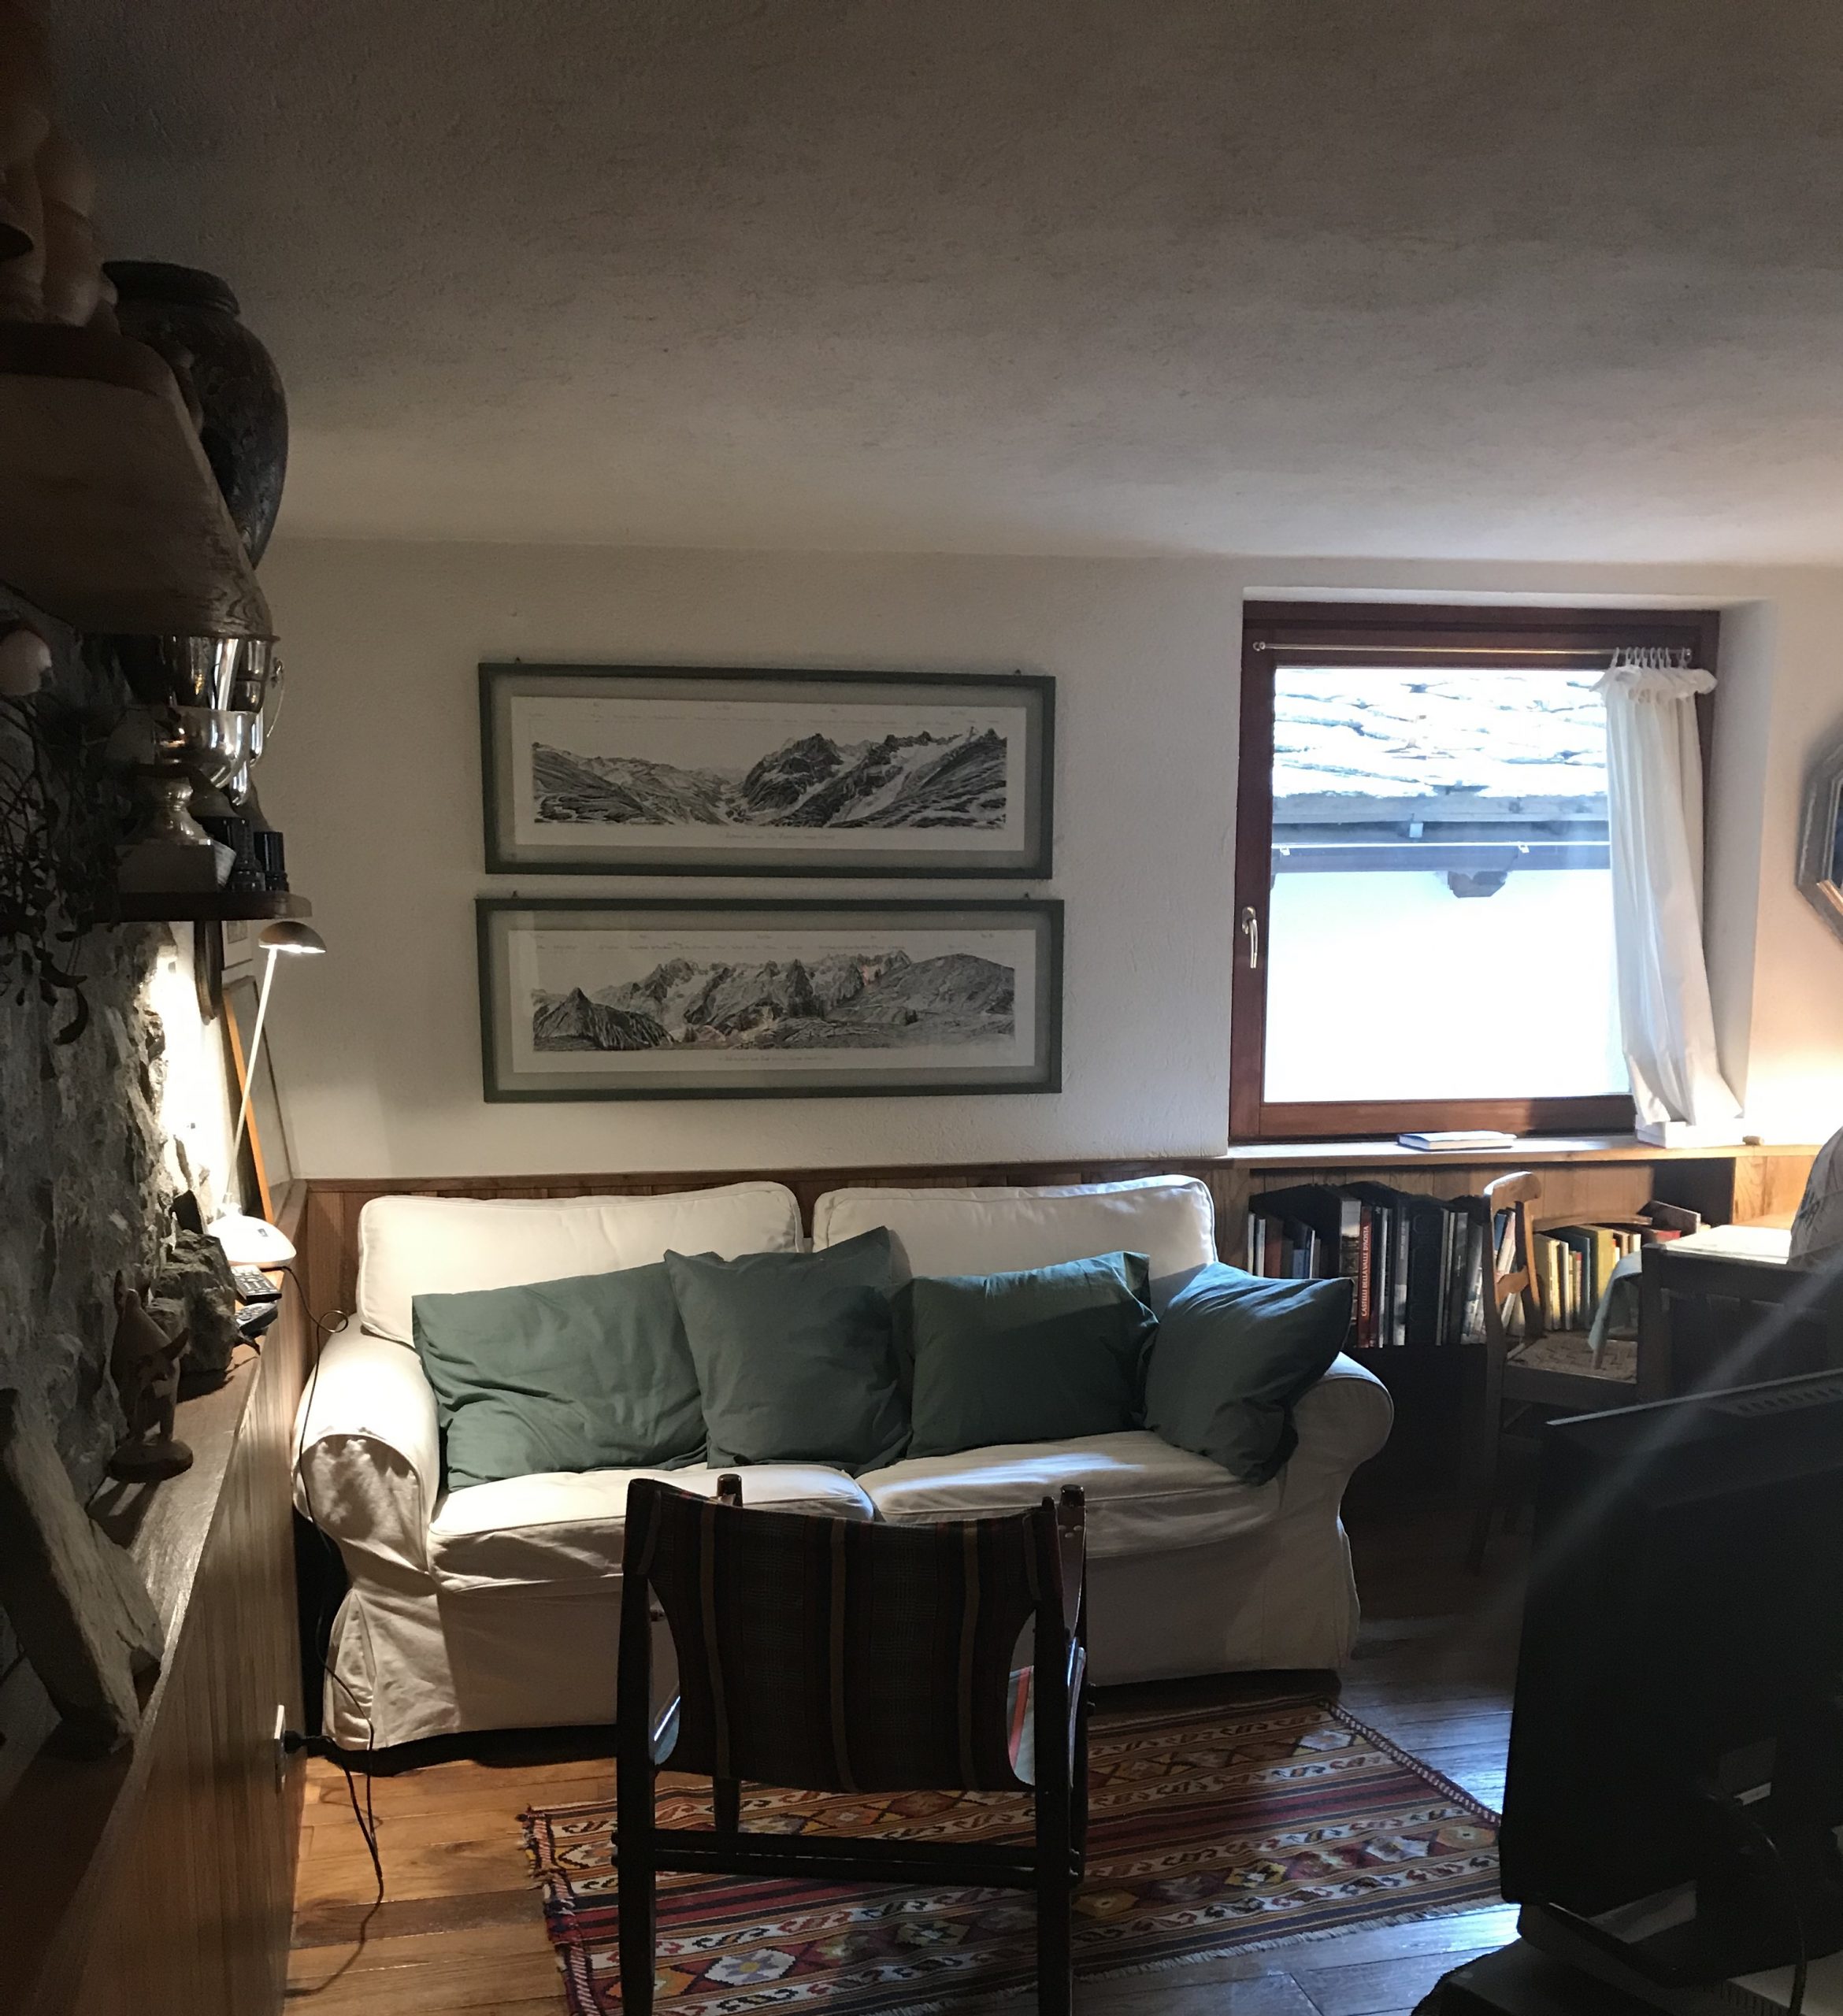 The flat in Villar Superieur in Courmayeur was nice, but too compact. My experience of buying a home in the Italian Alps.